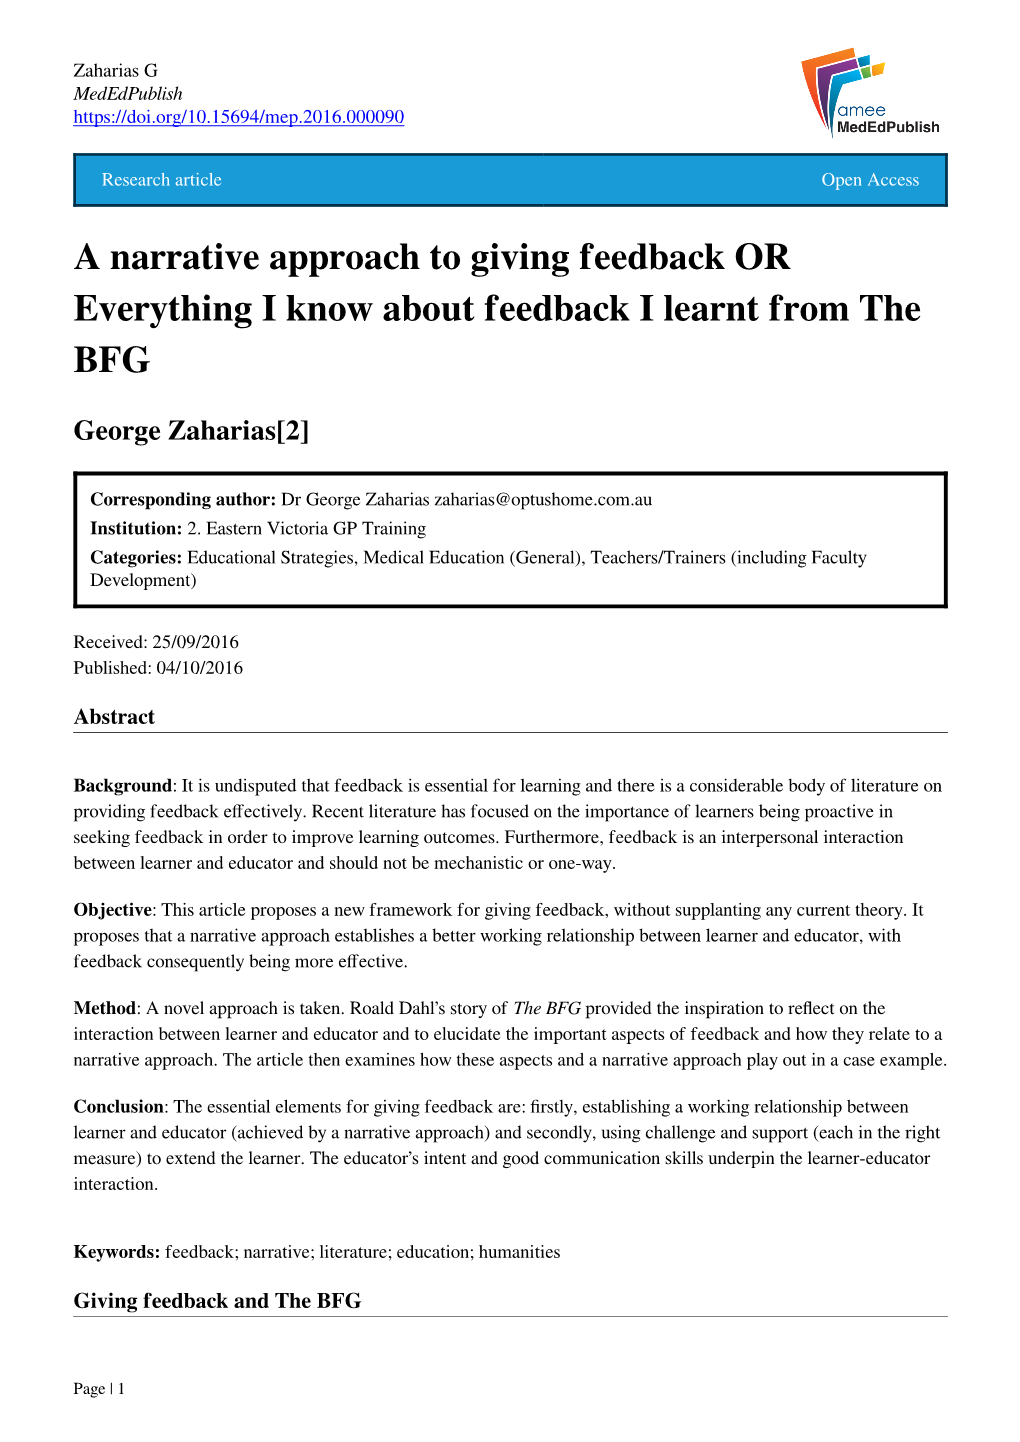 A Narrative Approach to Giving Feedback OR Everything I Know About Feedback I Learnt from the BFG